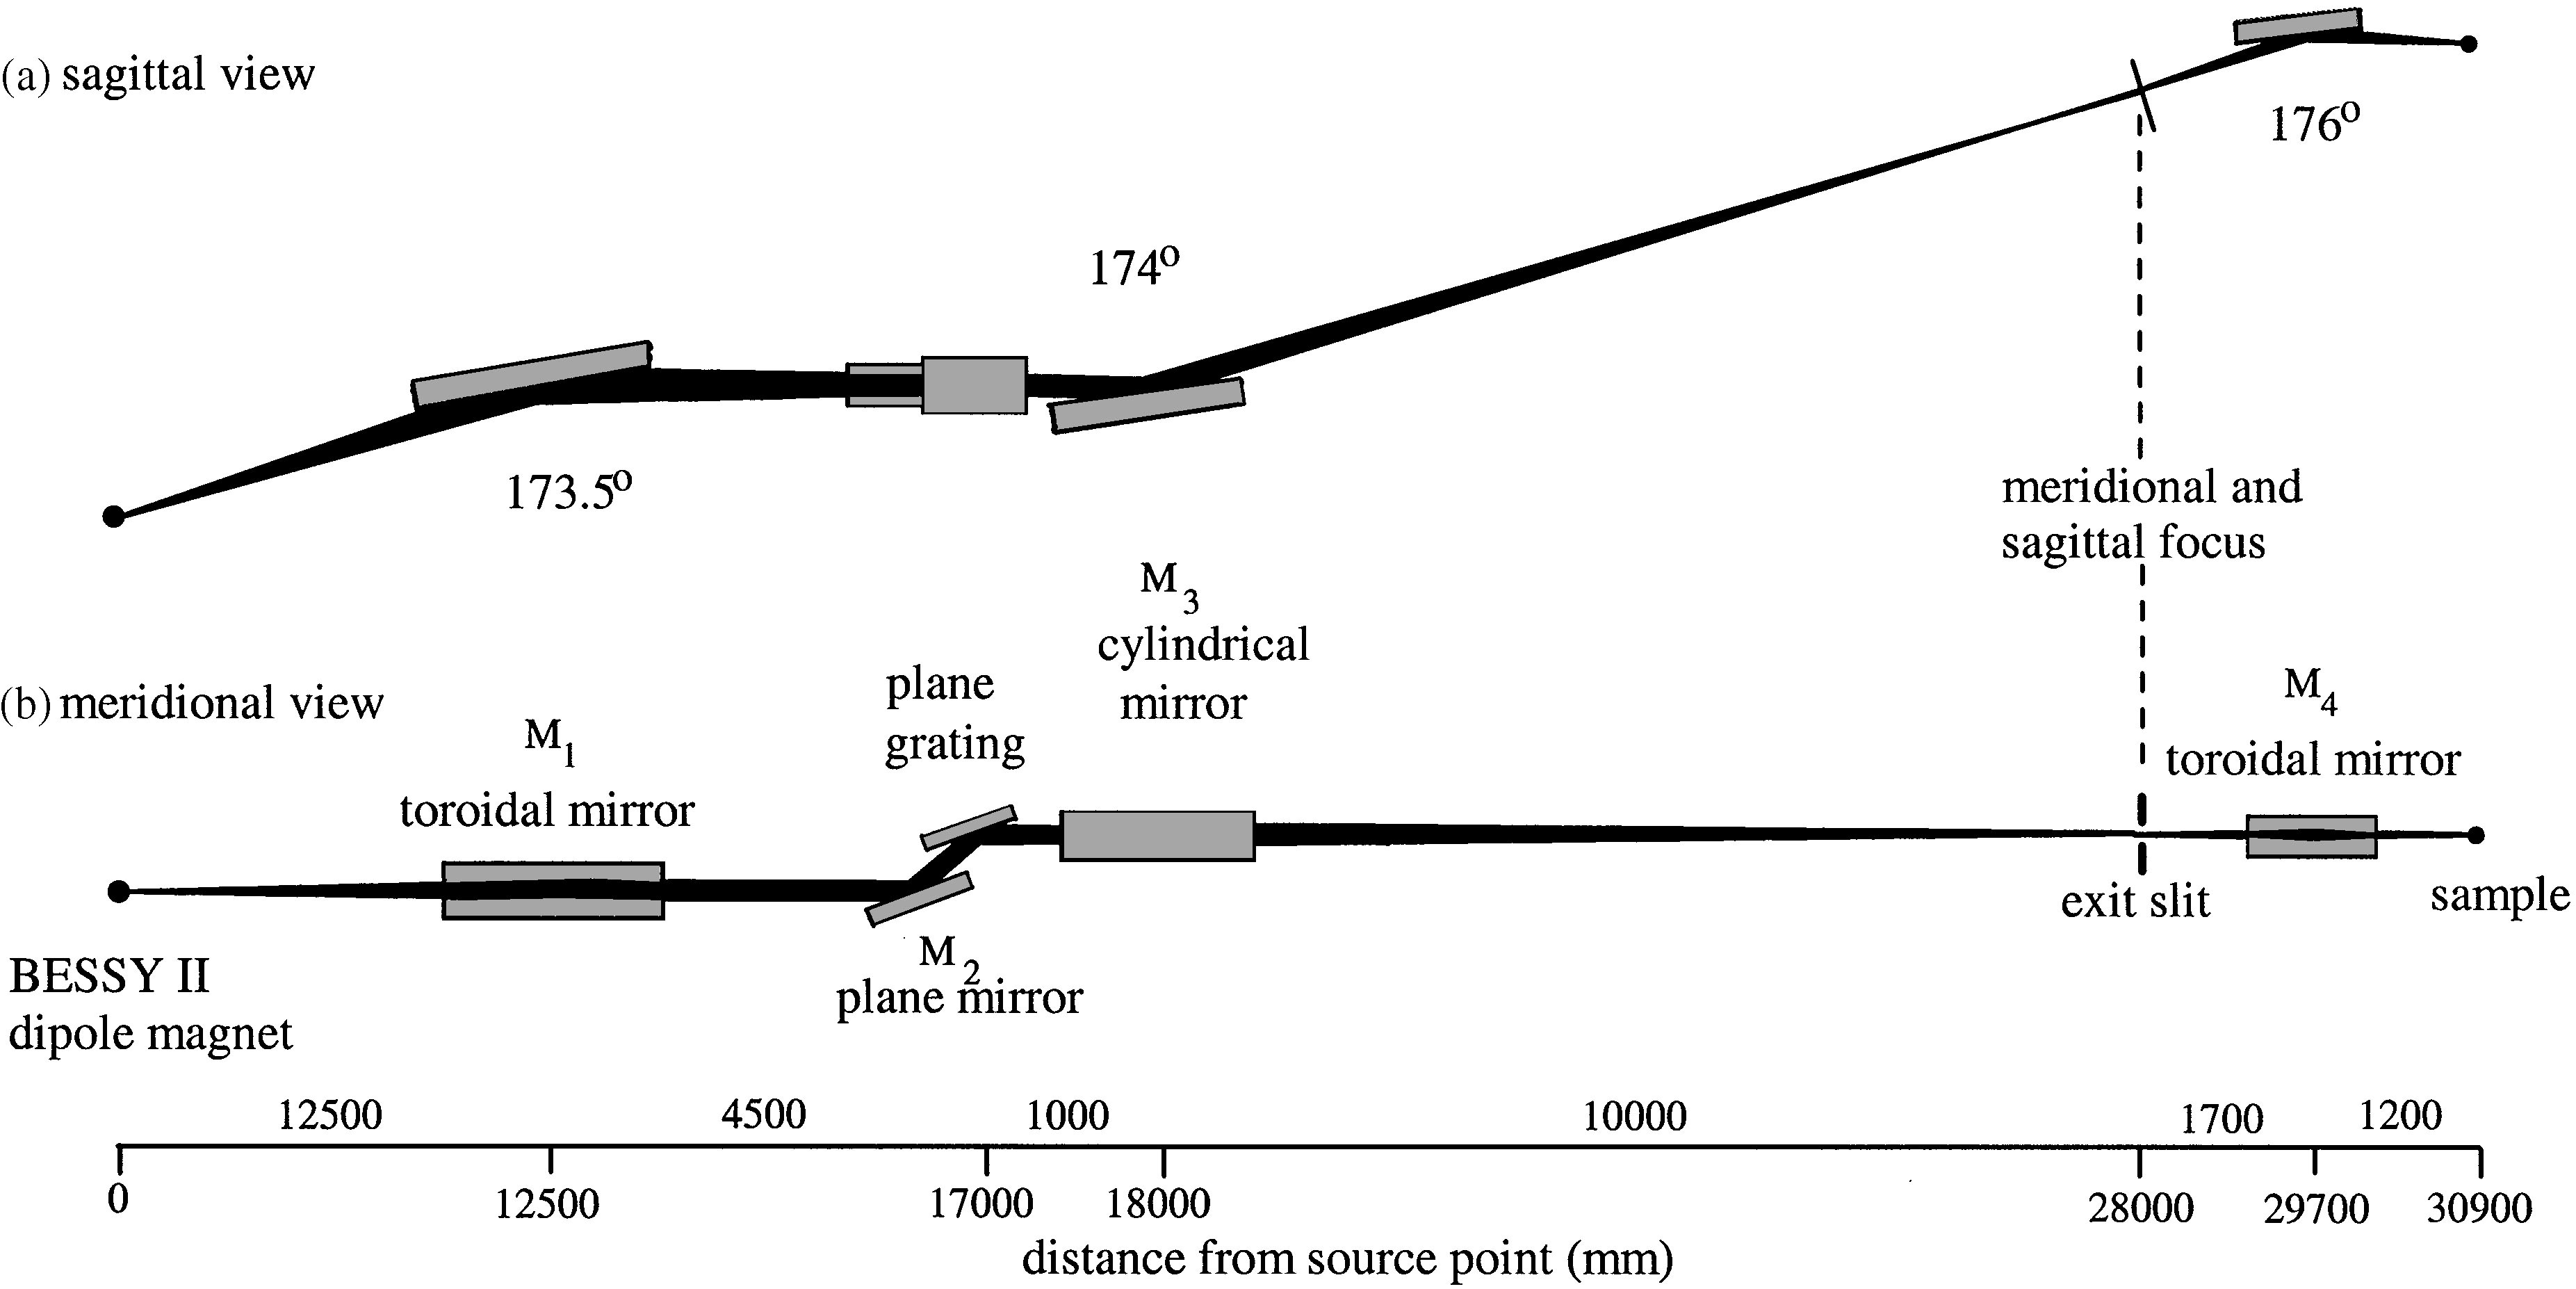 Optical layout of the GELEM dipole Beamline. [Gorovikov et al., Nucl. Instrum. Methods Phys. Res. A: Accel. Spectrom. Detect. Assoc. Equip. 467468 (2001) 565-568]